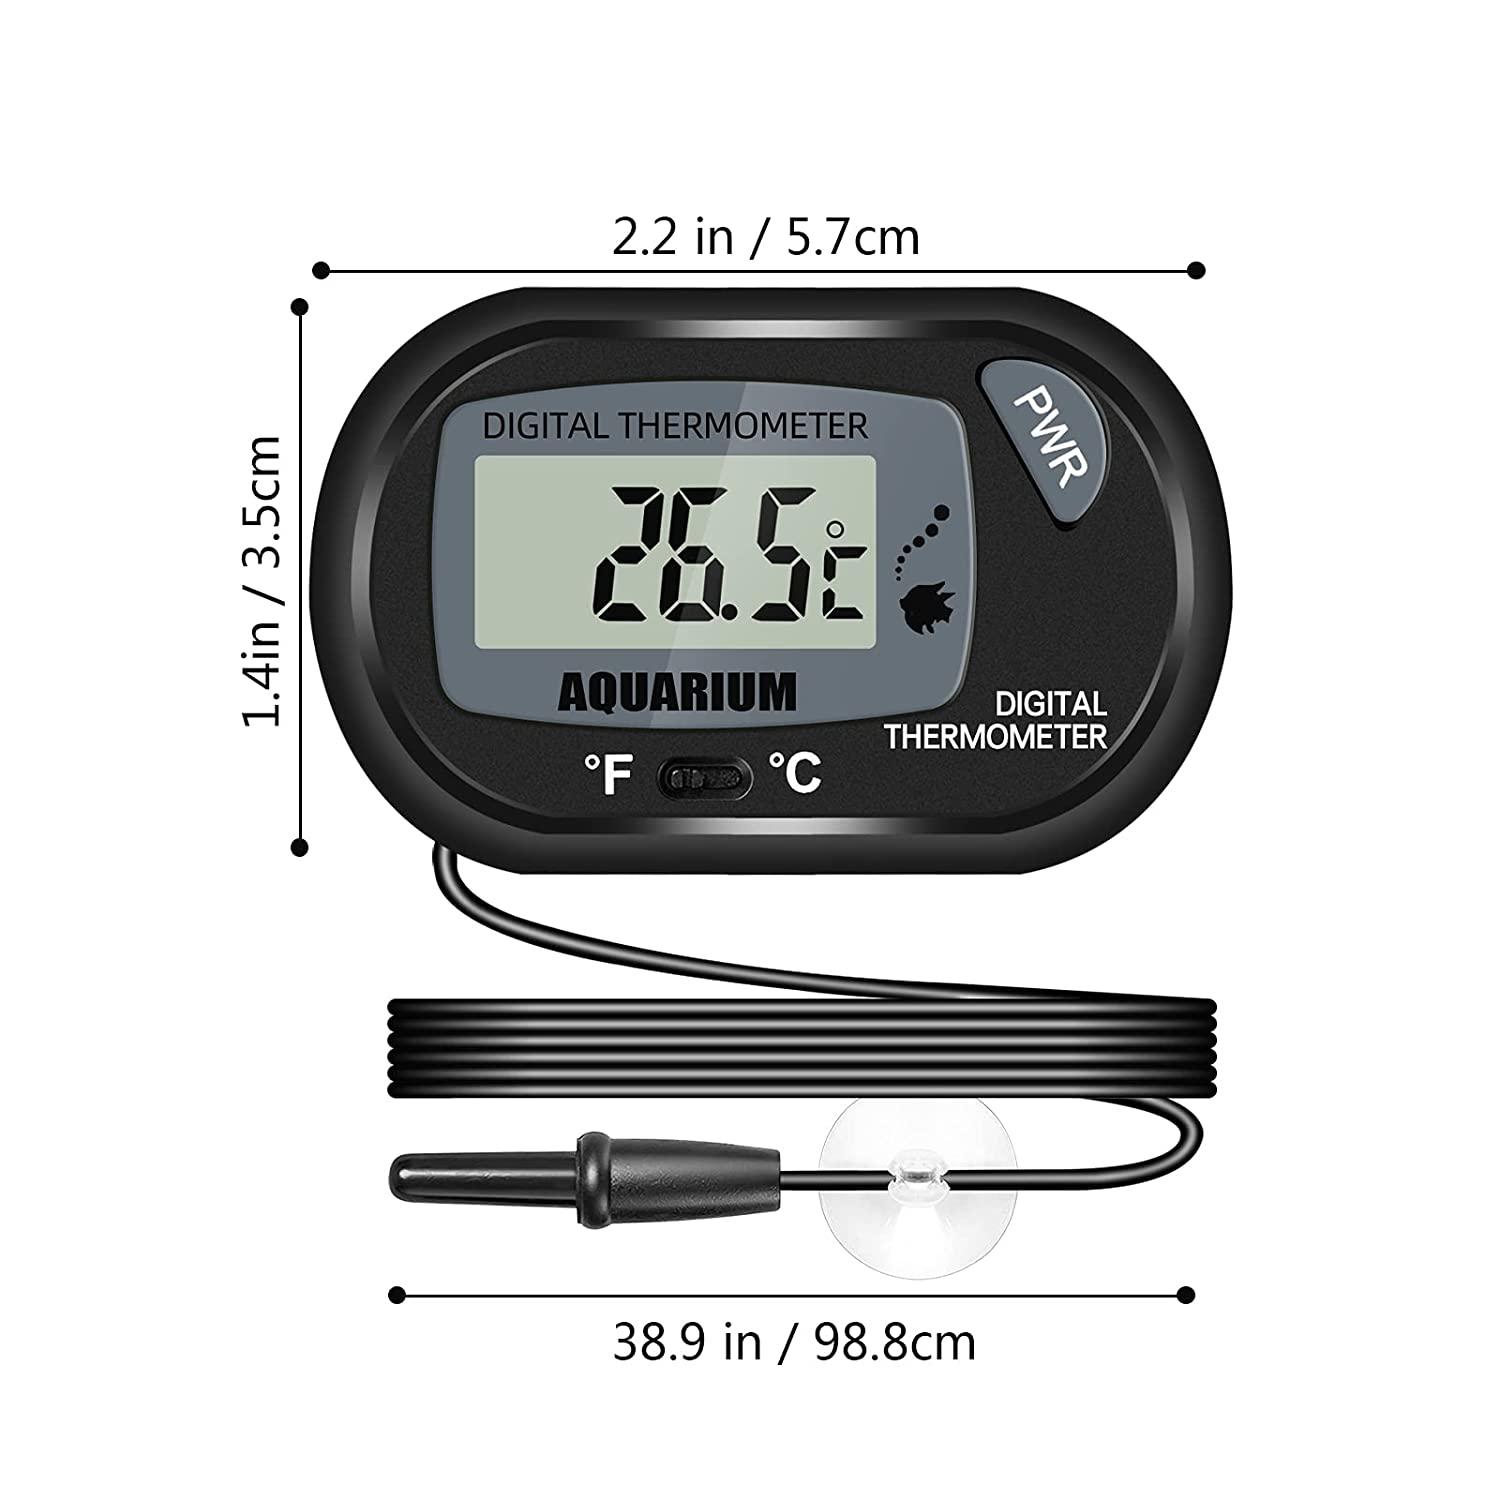 Digital Aquarium Thermometer With Attached Cord (Batteries Not Included)